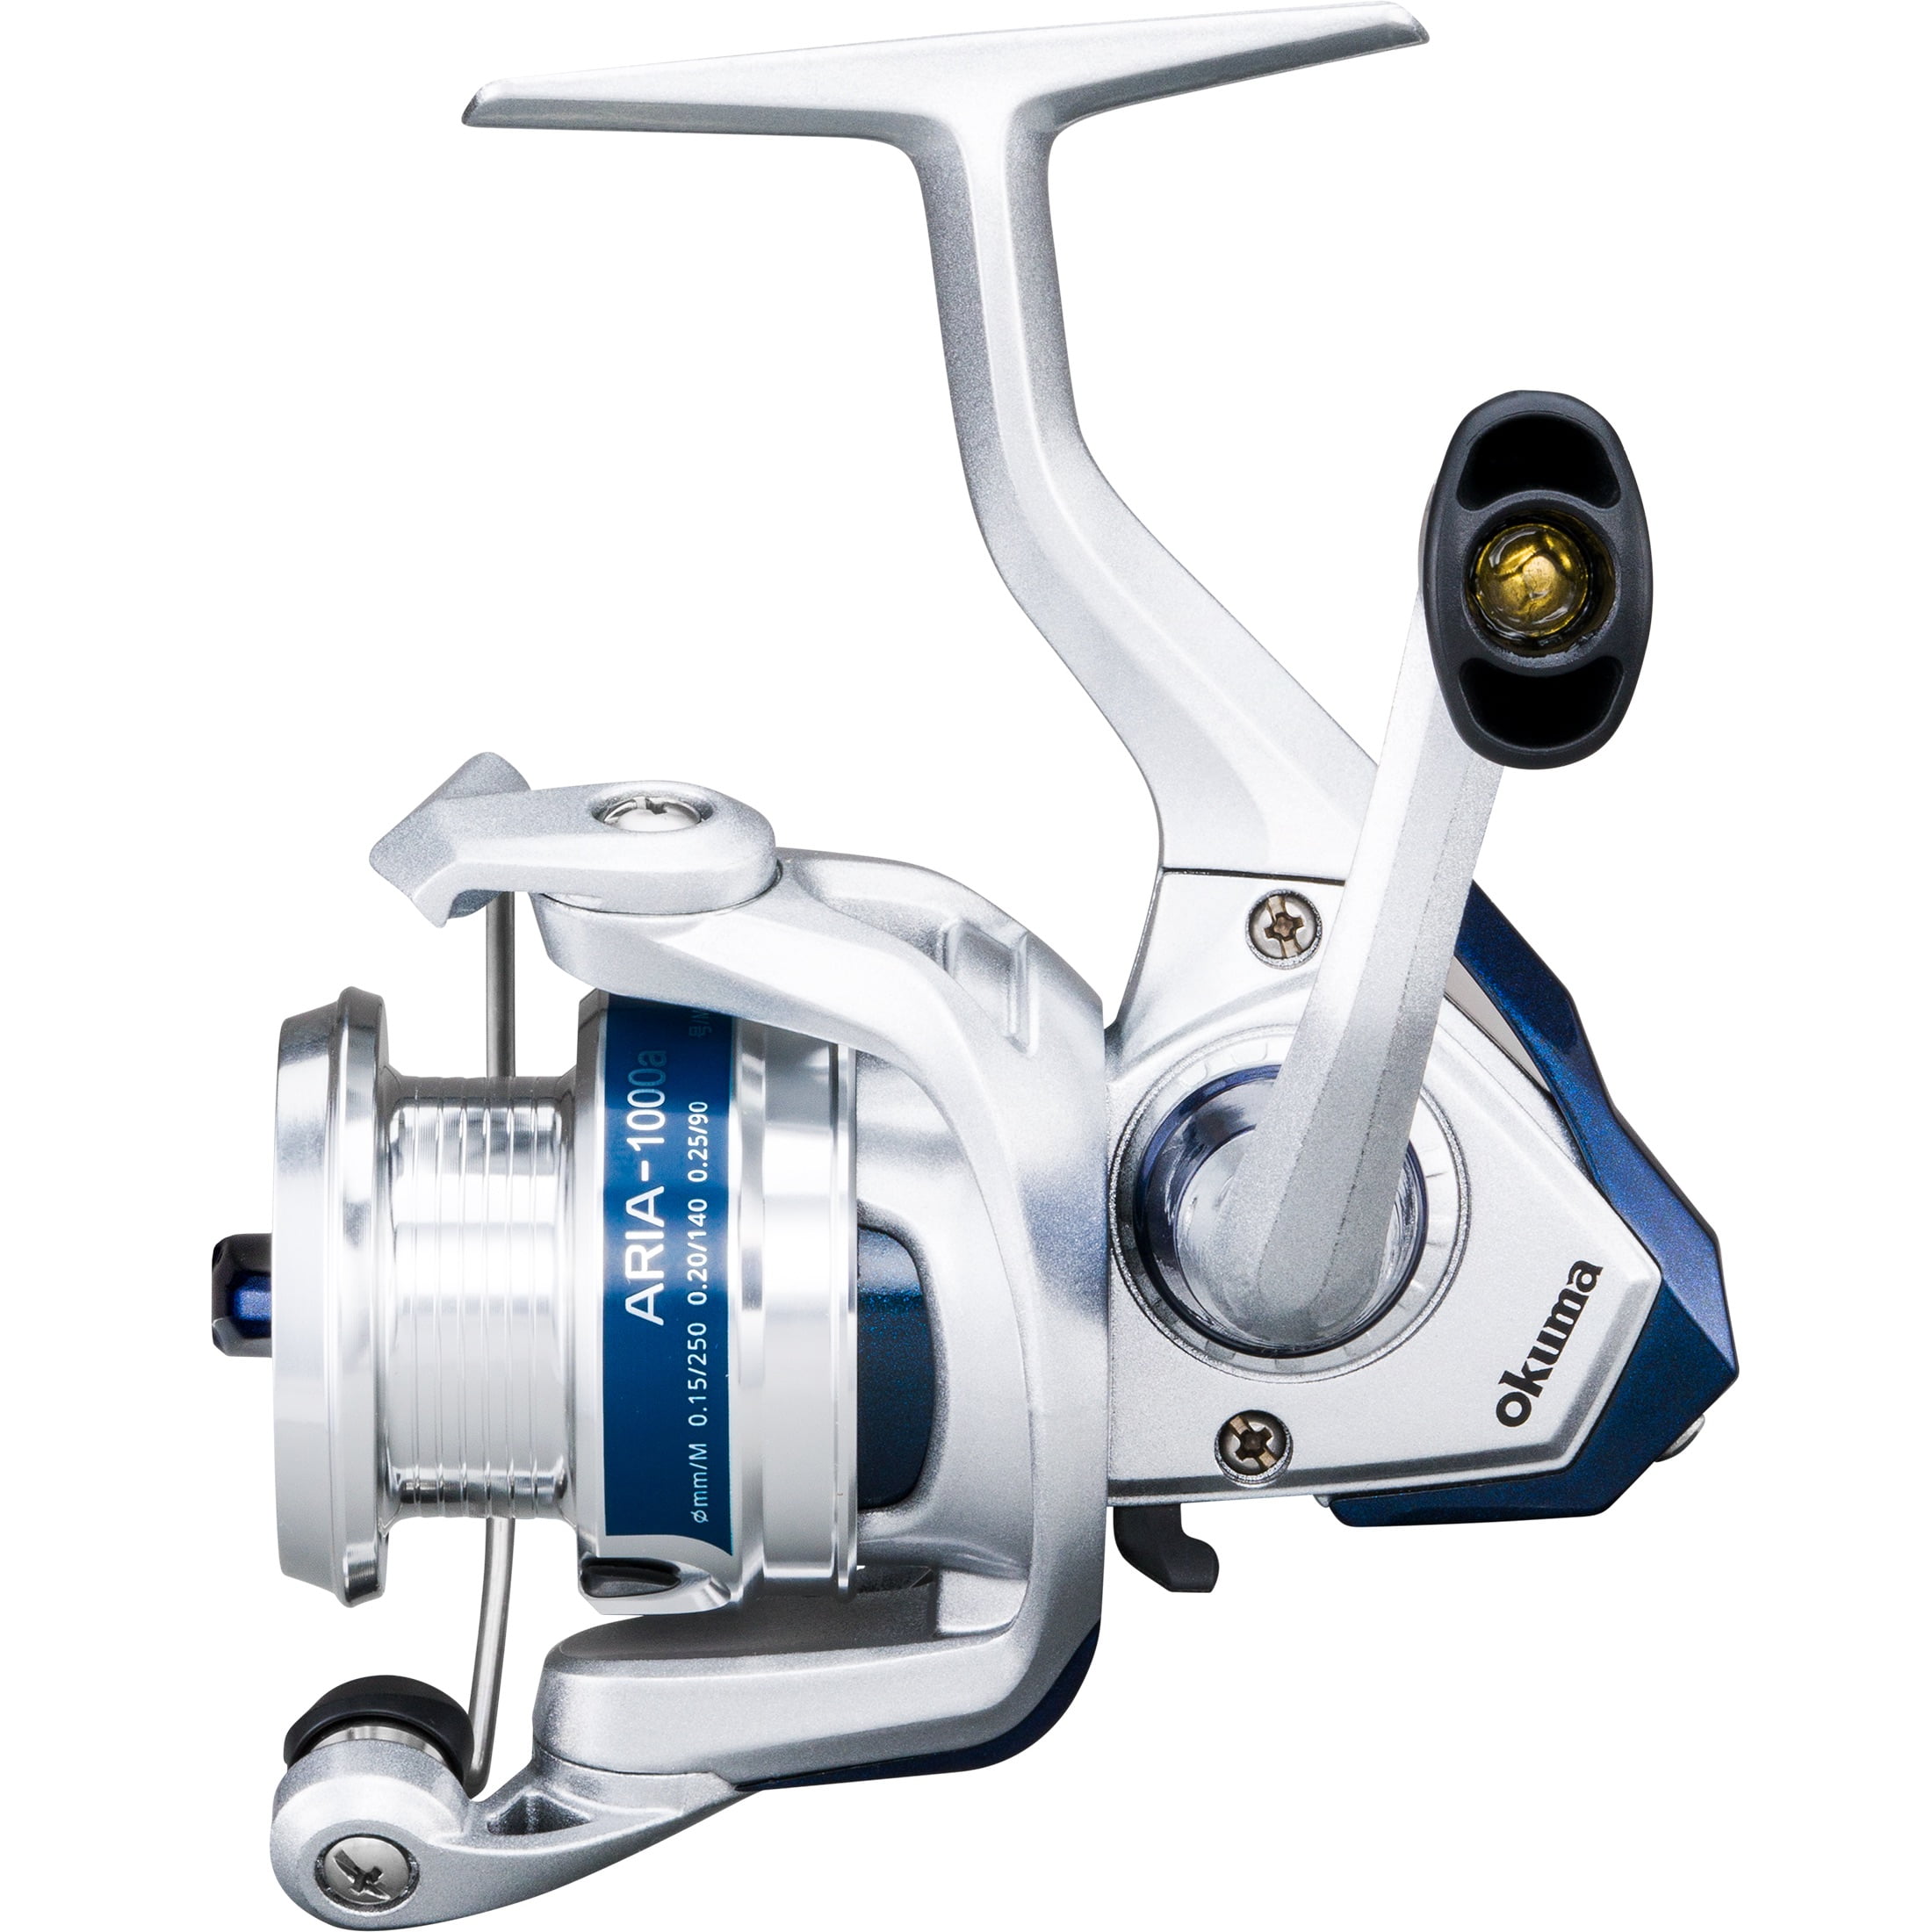 Okuma Aria 1000 Spinning Fishing Reel a Series in Clam Pack